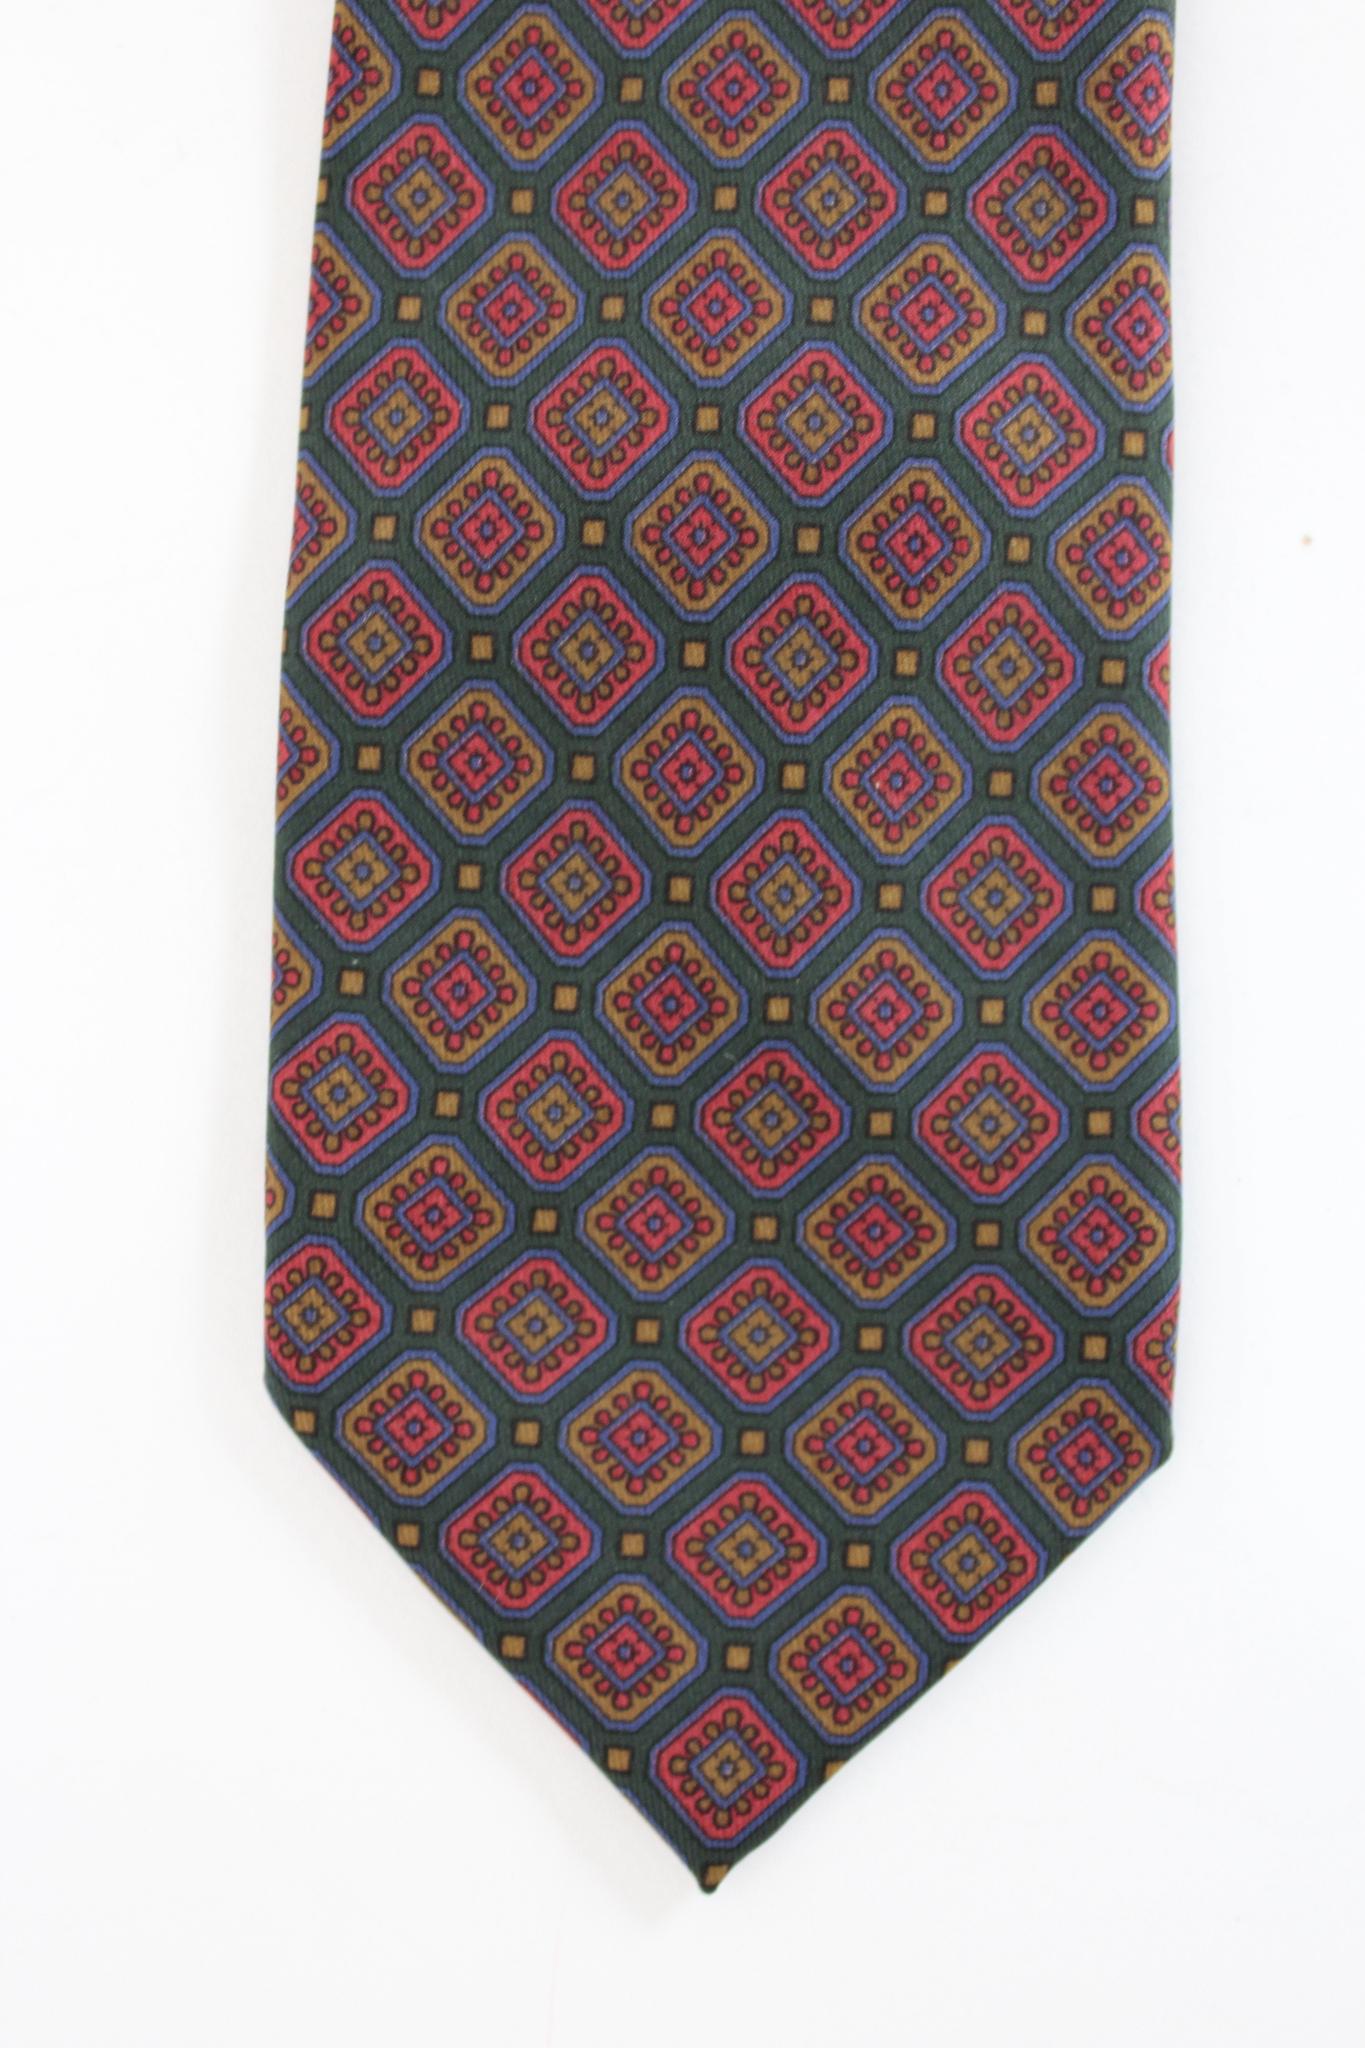 Basile classic 80s vintage tie. Green and red color with checked pattern. 100% silk. Made in Italy.

Length: 142 cm
Width: 7.5 cm